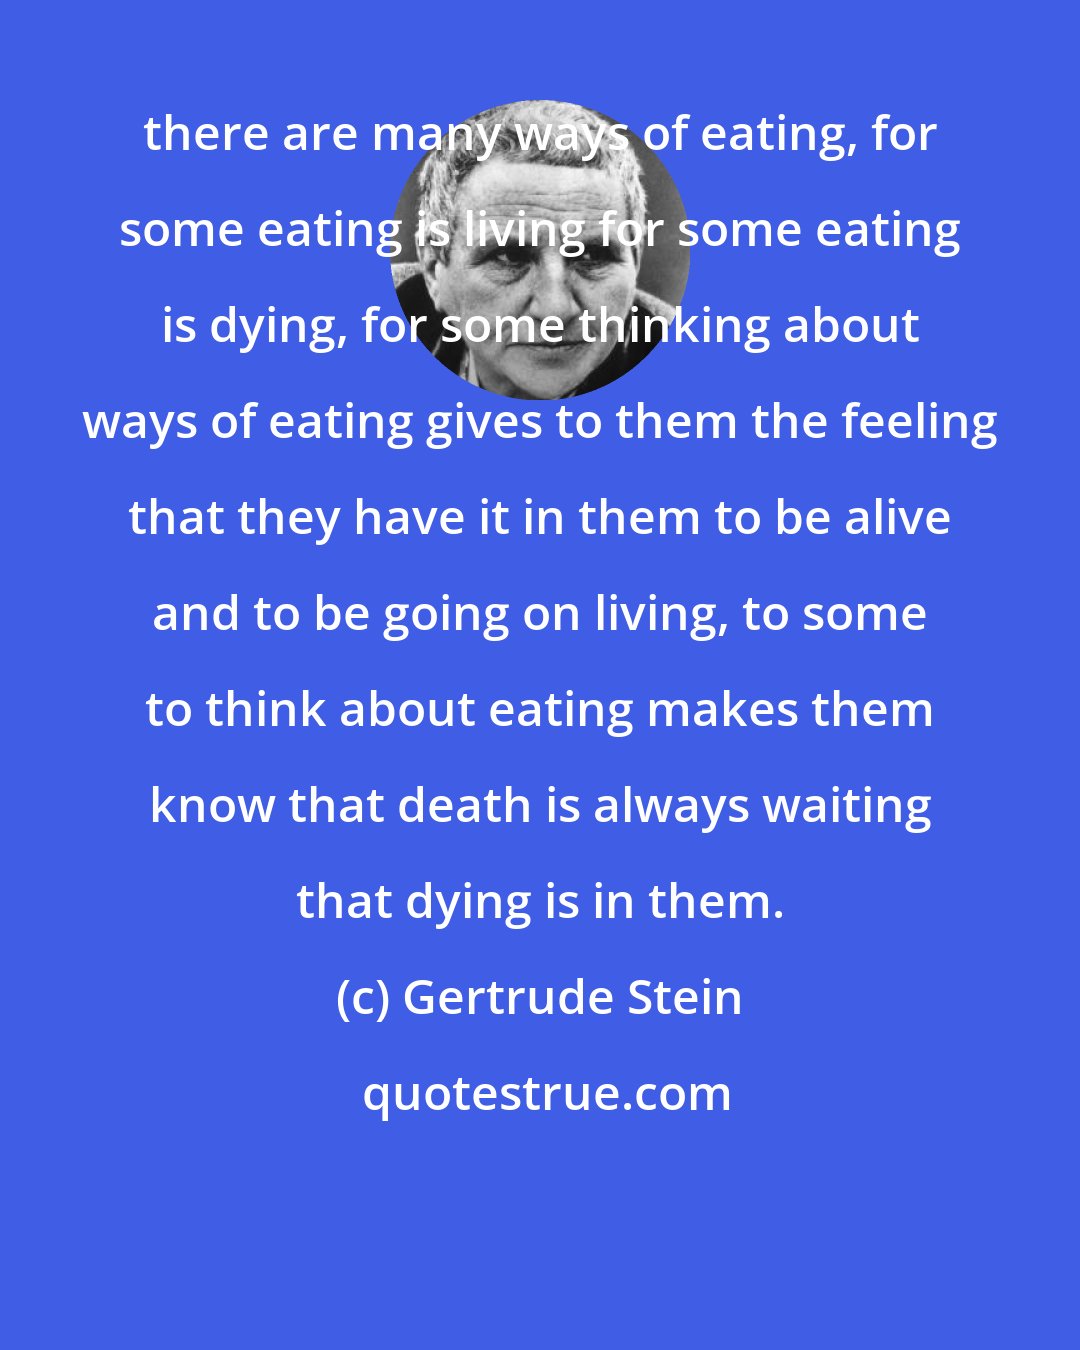 Gertrude Stein: there are many ways of eating, for some eating is living for some eating is dying, for some thinking about ways of eating gives to them the feeling that they have it in them to be alive and to be going on living, to some to think about eating makes them know that death is always waiting that dying is in them.